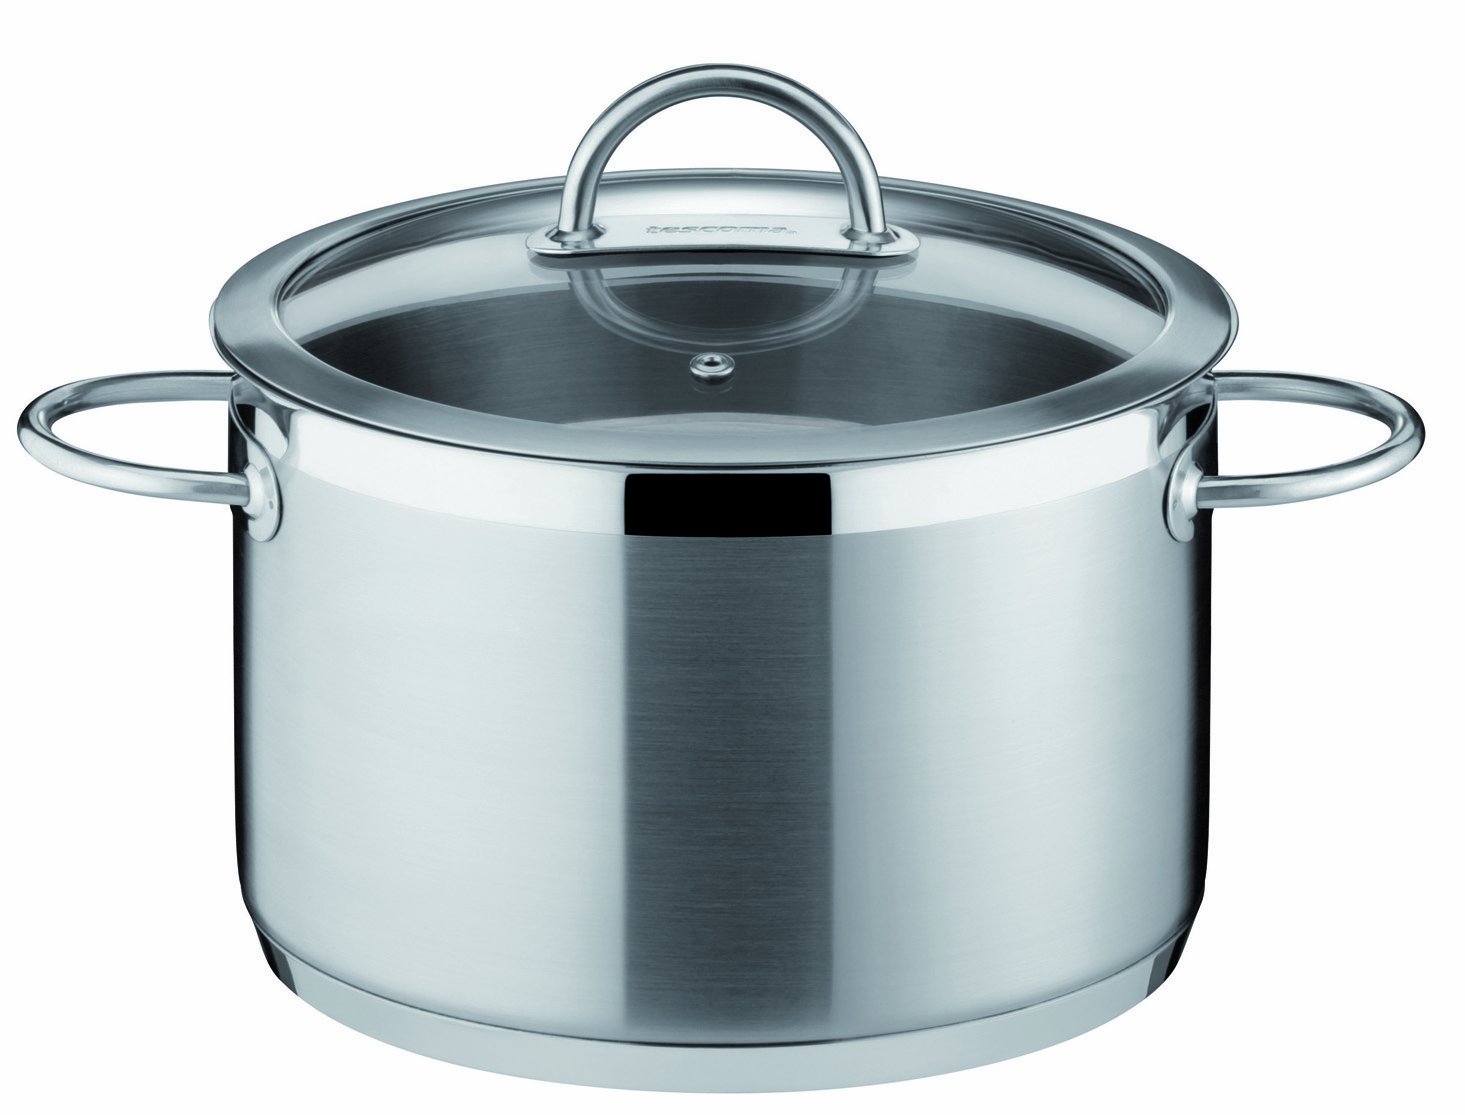 Tescoma Vision 28 Cm/ 11 Litre Deep Pot With Cover